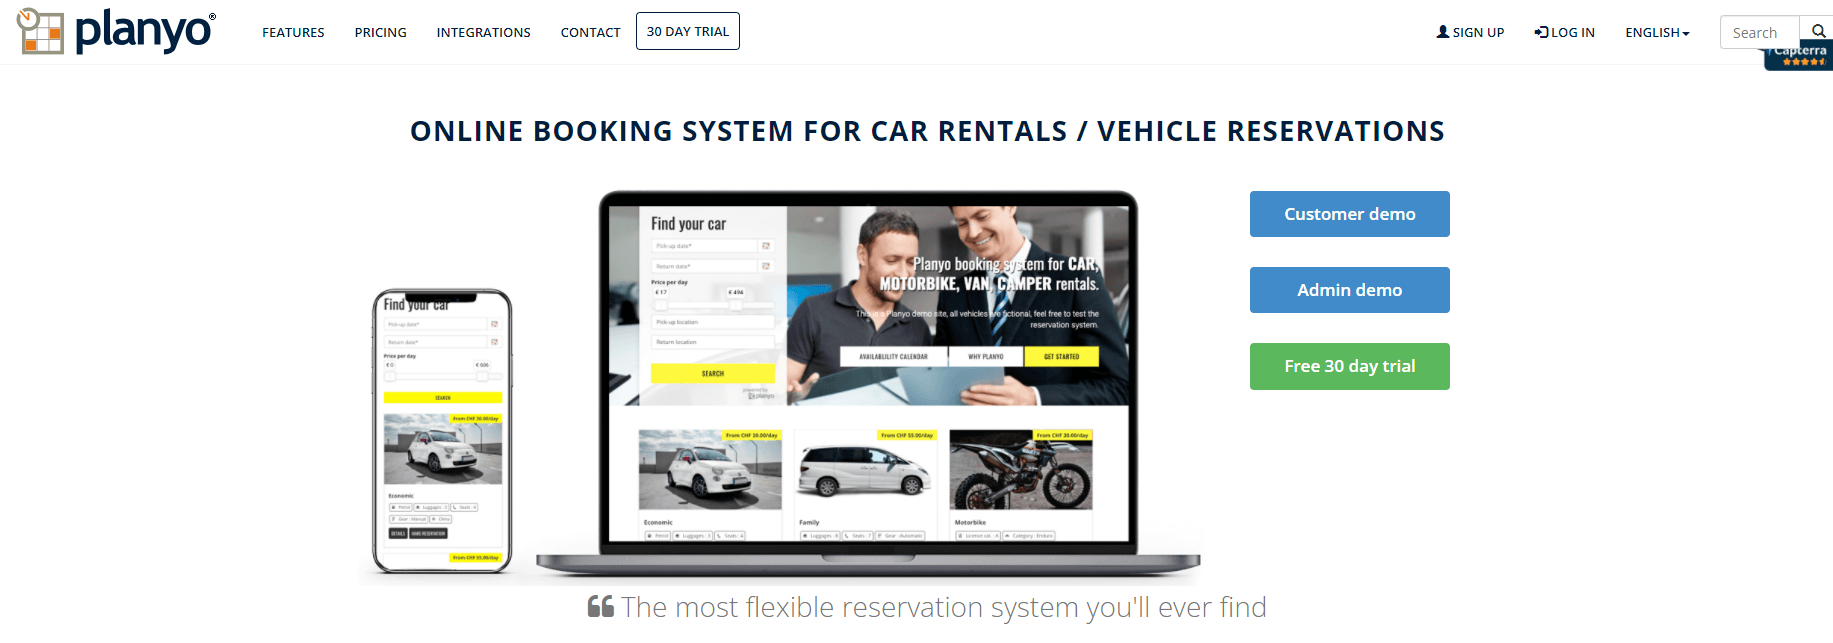 planyo vehicle booking software for car rentals